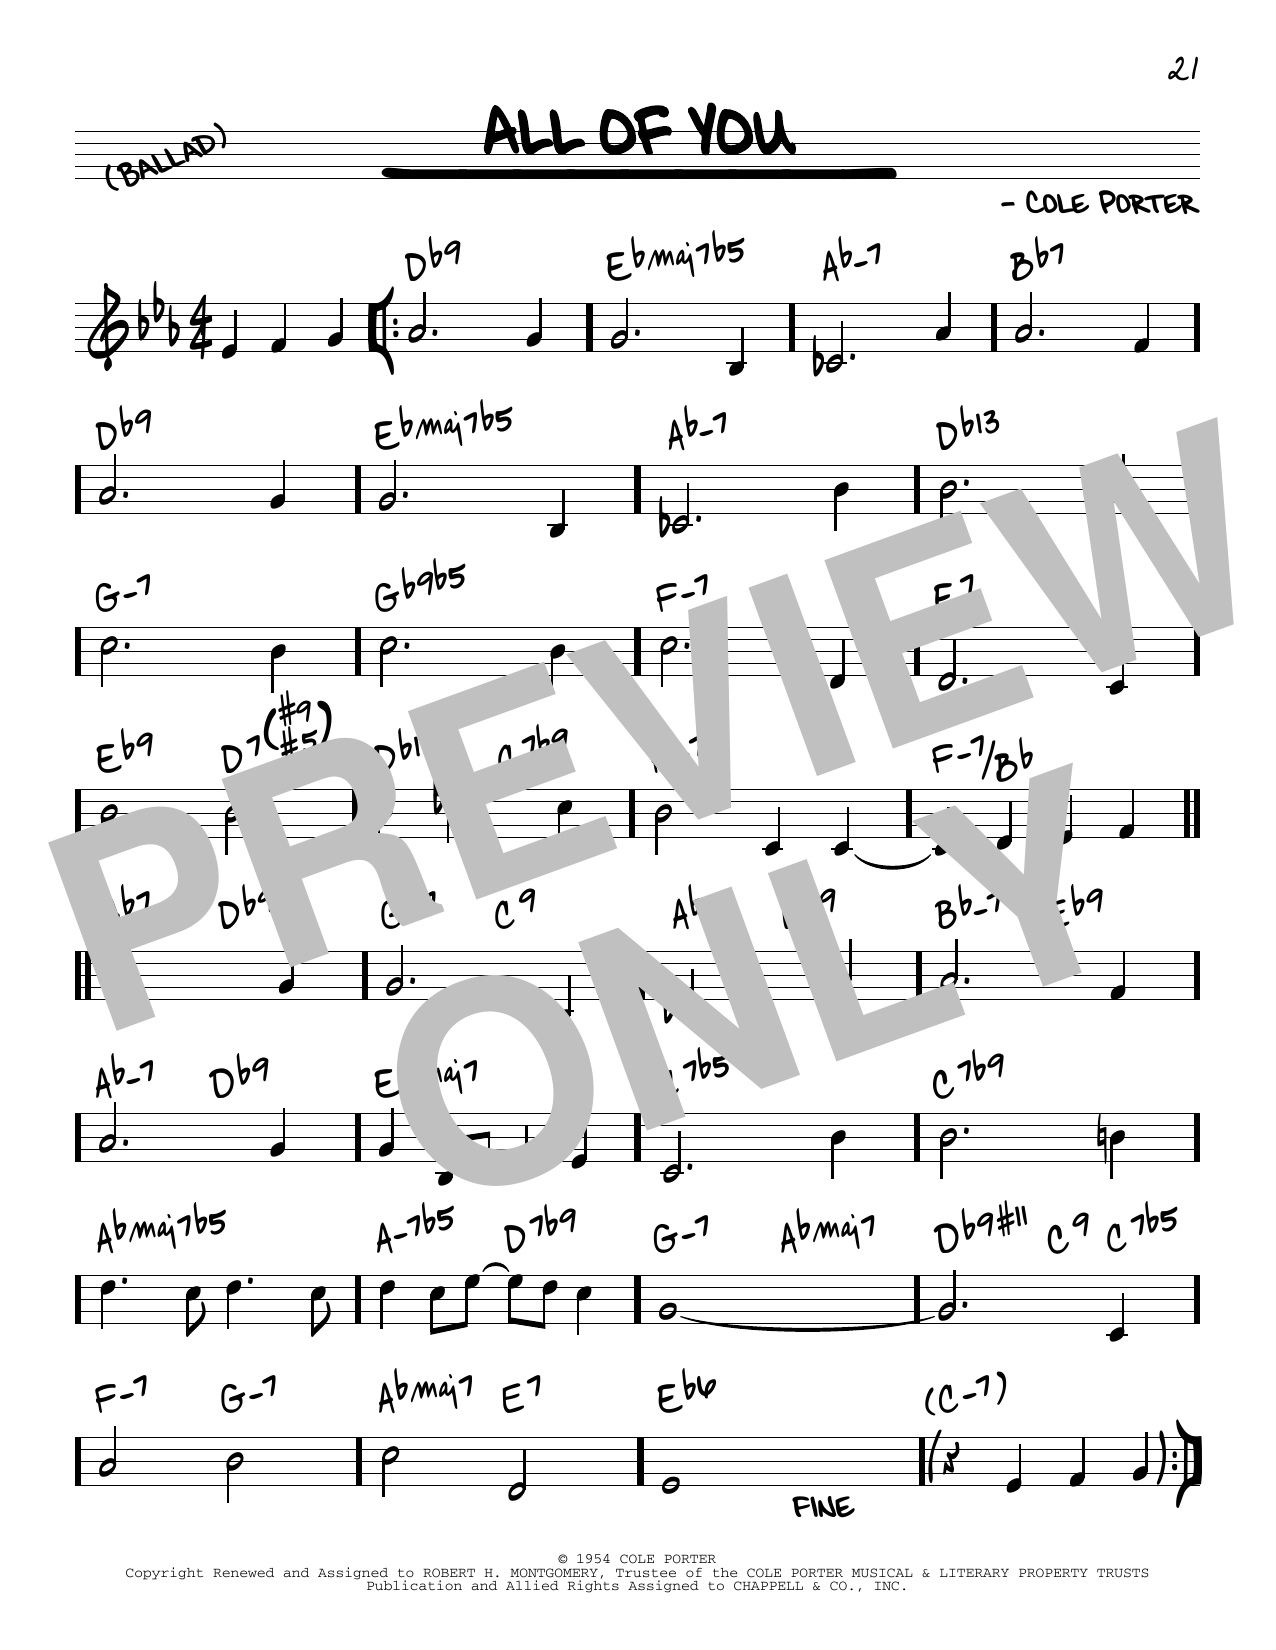 Download Cole Porter All Of You [Reharmonized version] (arr. Sheet Music